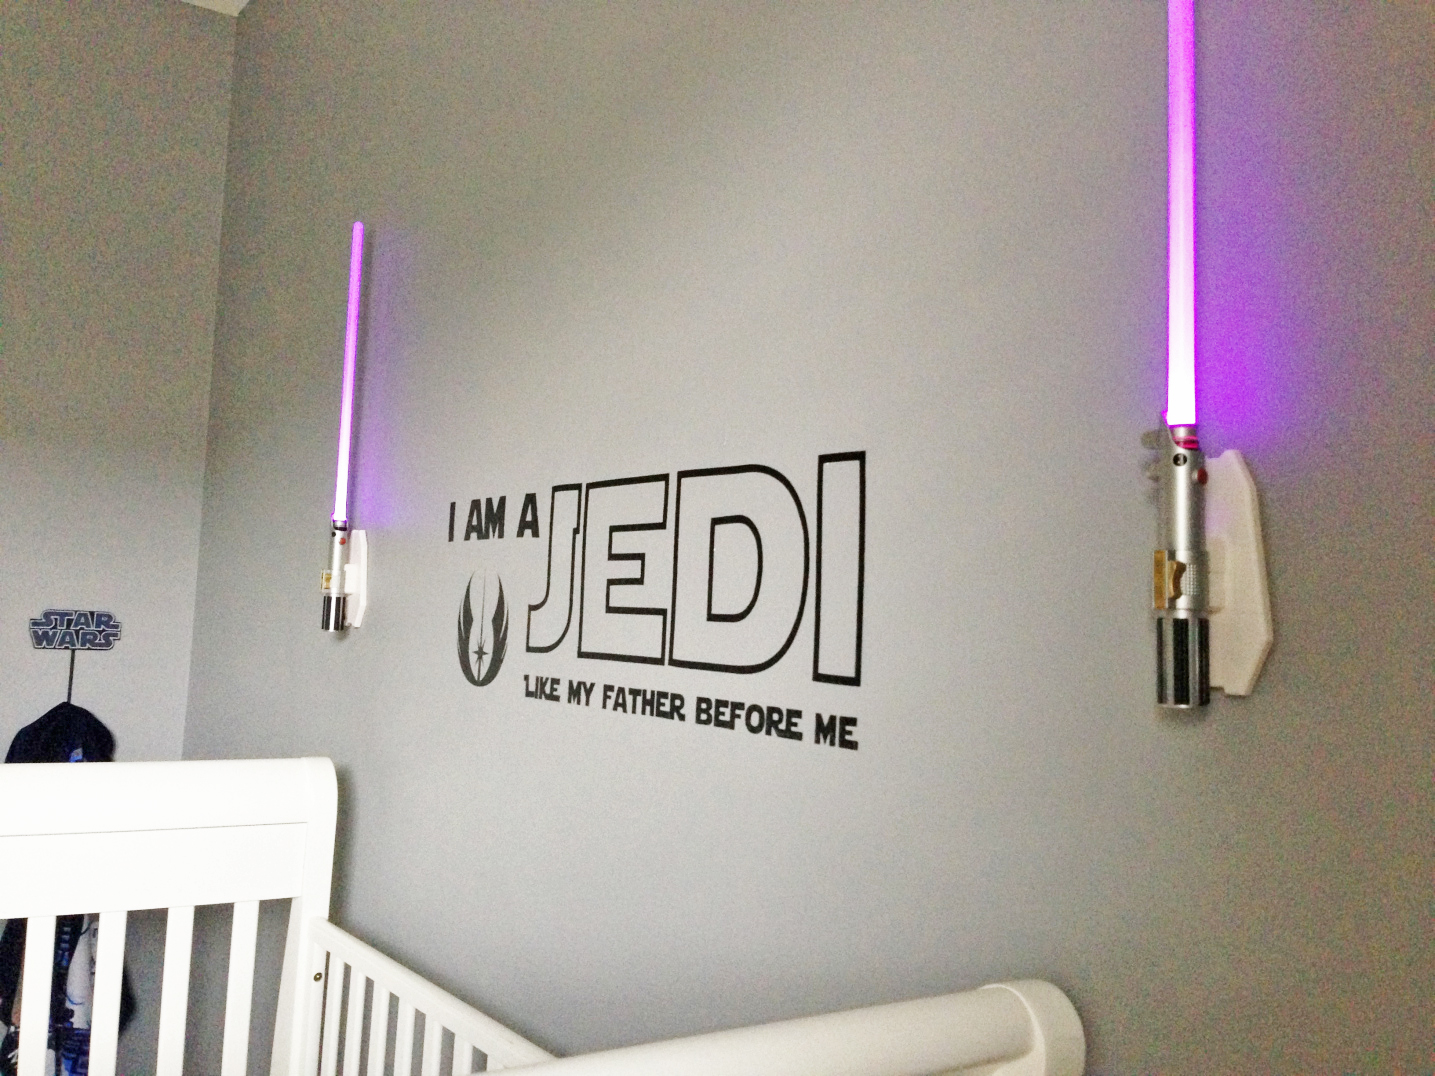 These pink Jedi light sabers are one-of-a-kind for this crib room.